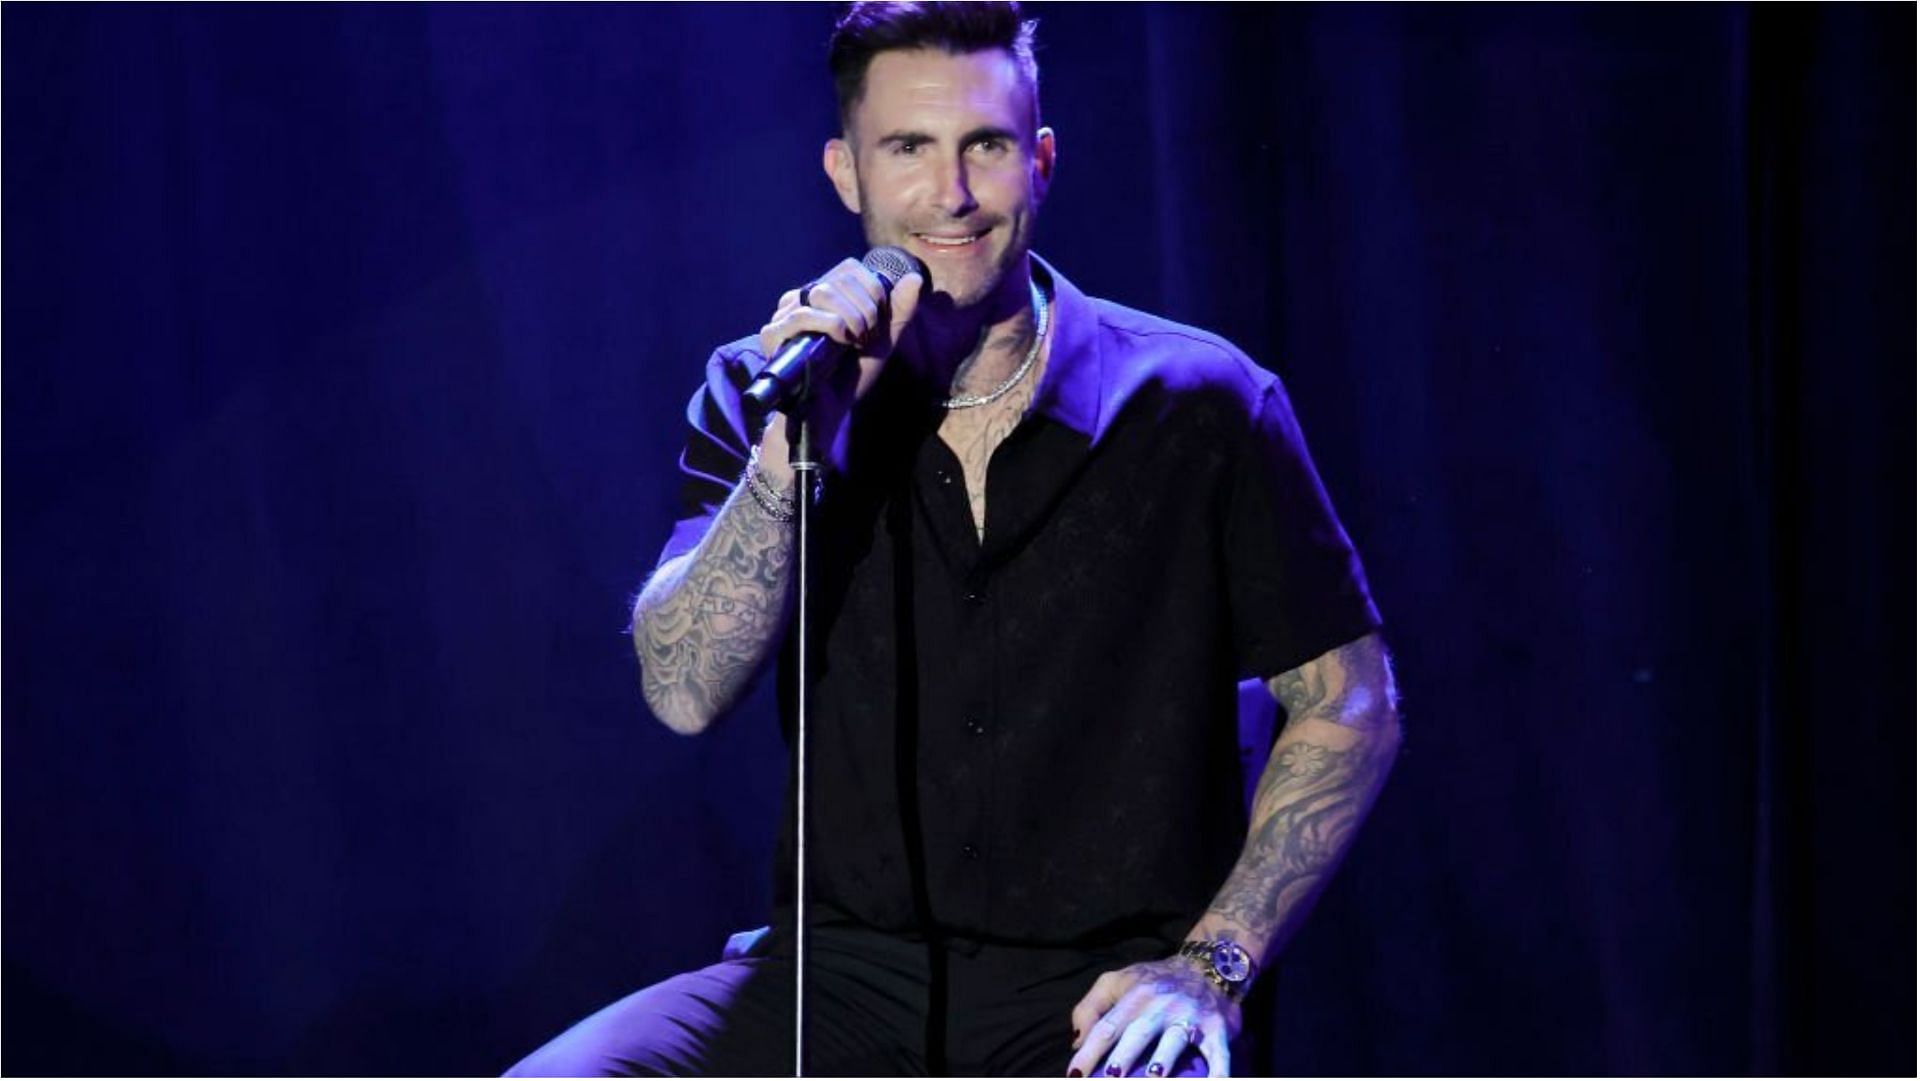 Adam Levine was accused of having an affair with a TikTok star (Image via Kevin Winter/Getty Images)